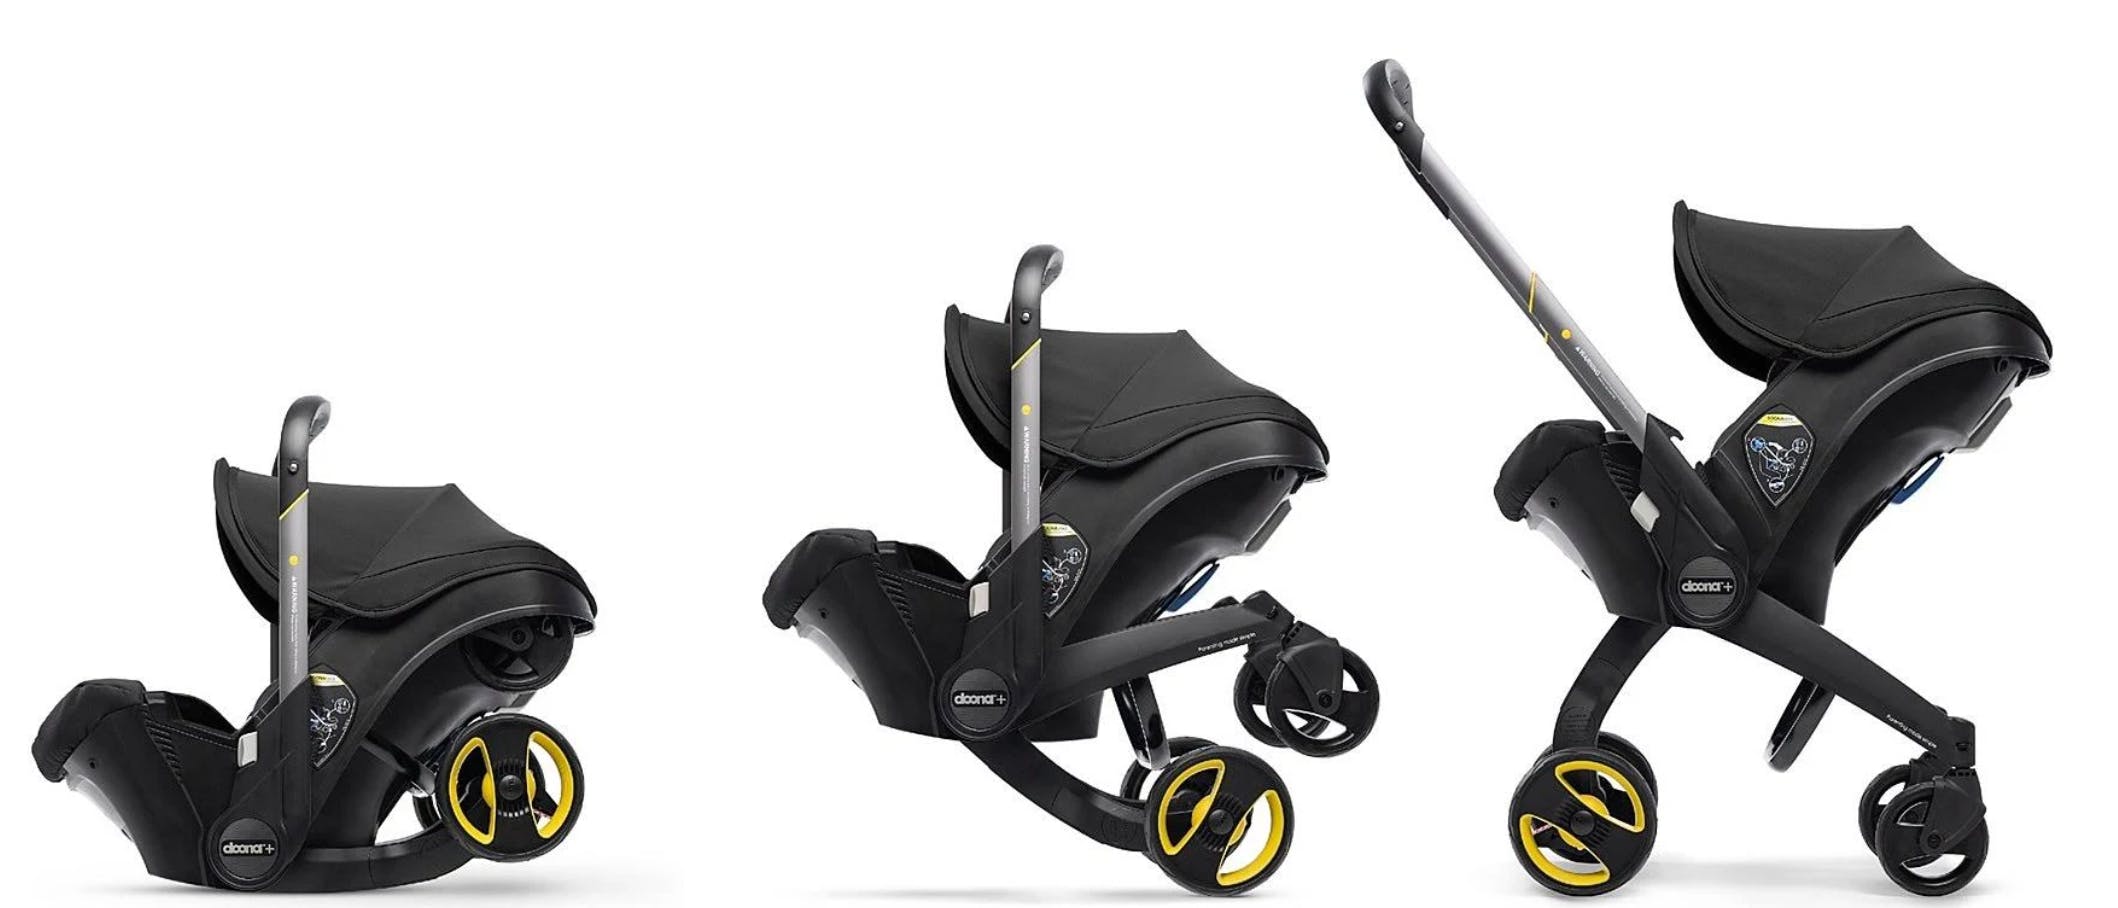 The Doona Infant Car Seat and Stroller.